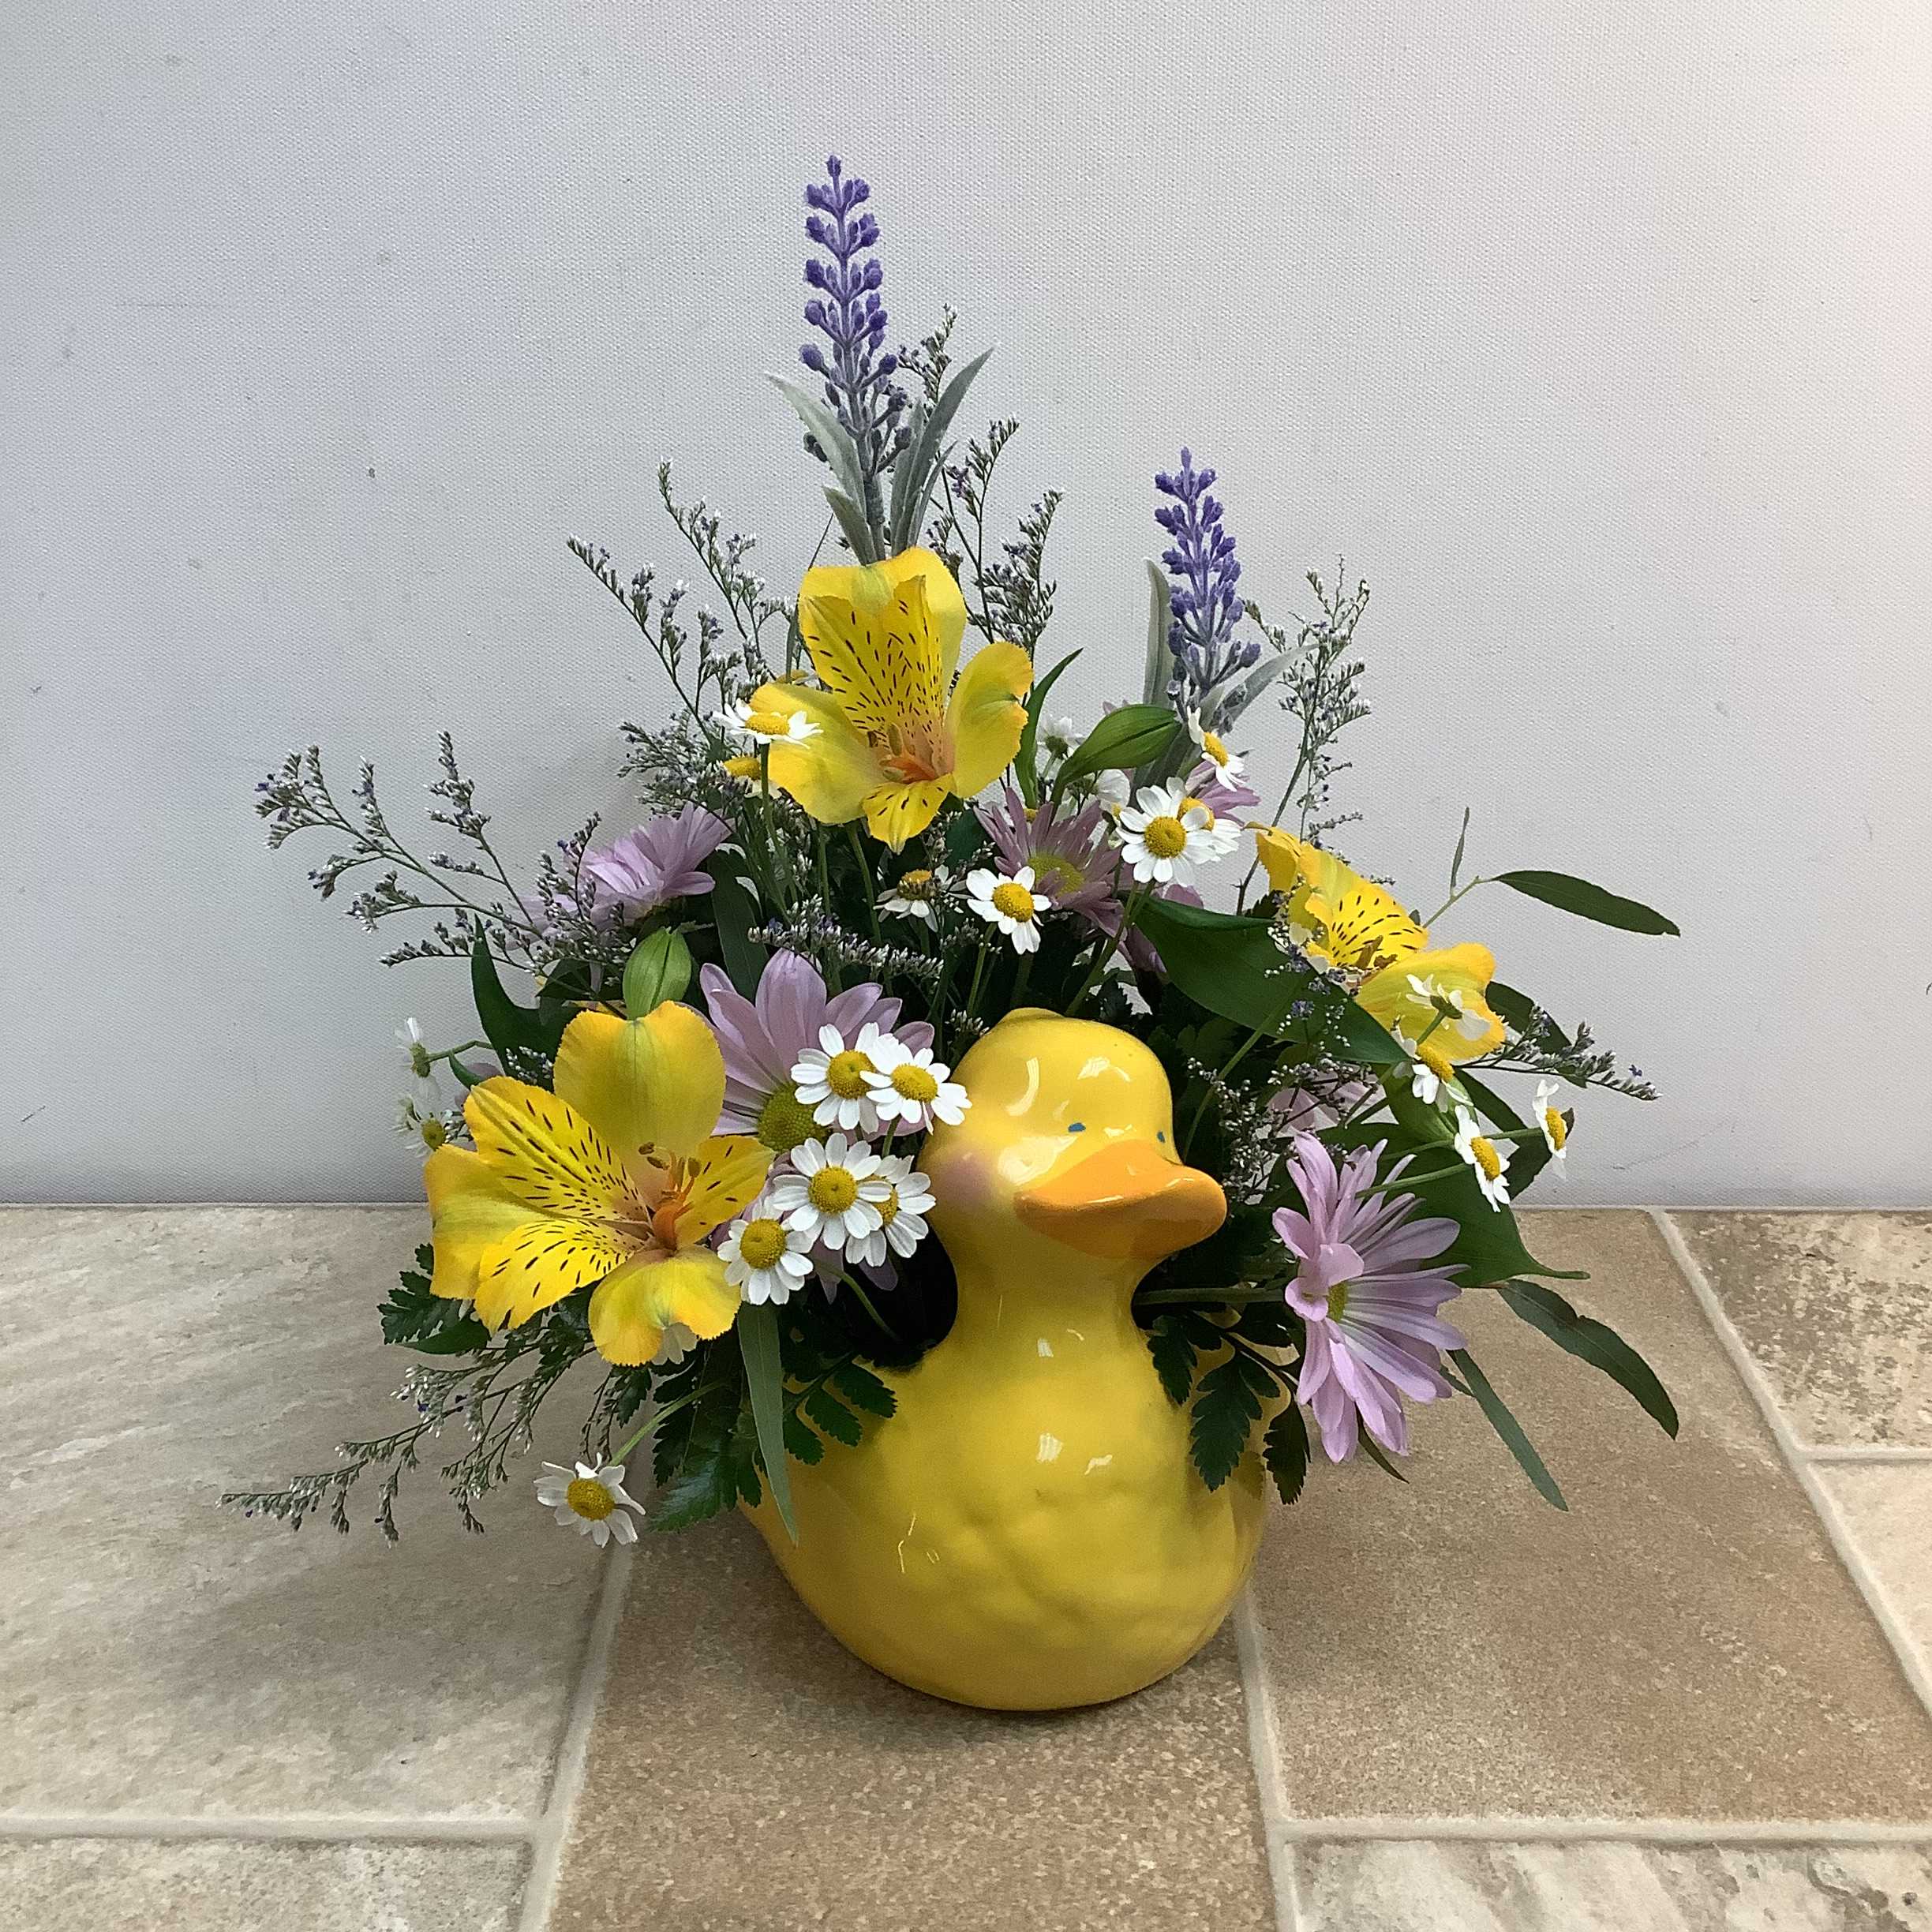 Just Ducky - A delightful bouquet arranged in a friendly ceramic duck filled with a beautiful collection of fresh blooms. Feverfew, alstroemeria and daisies are perfectly blended to make someone perfectly happy.